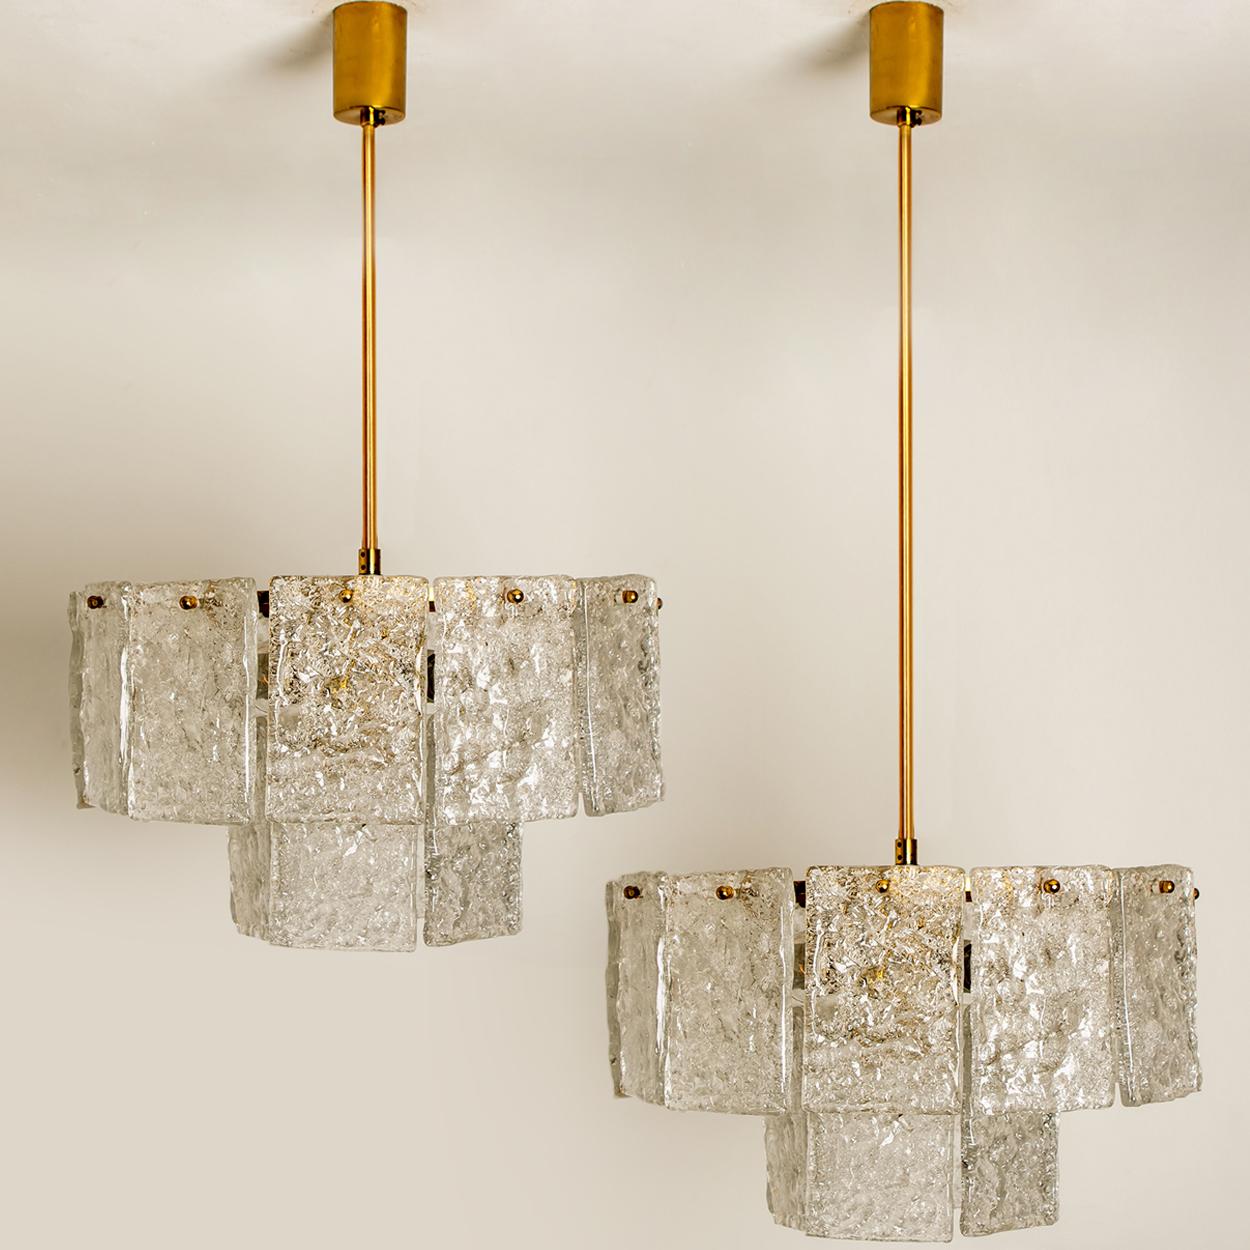 Mid-20th Century 1 of the 2 of Glass and Brass Two Tiers Light Fixtures from Hillebrand, 1960s For Sale